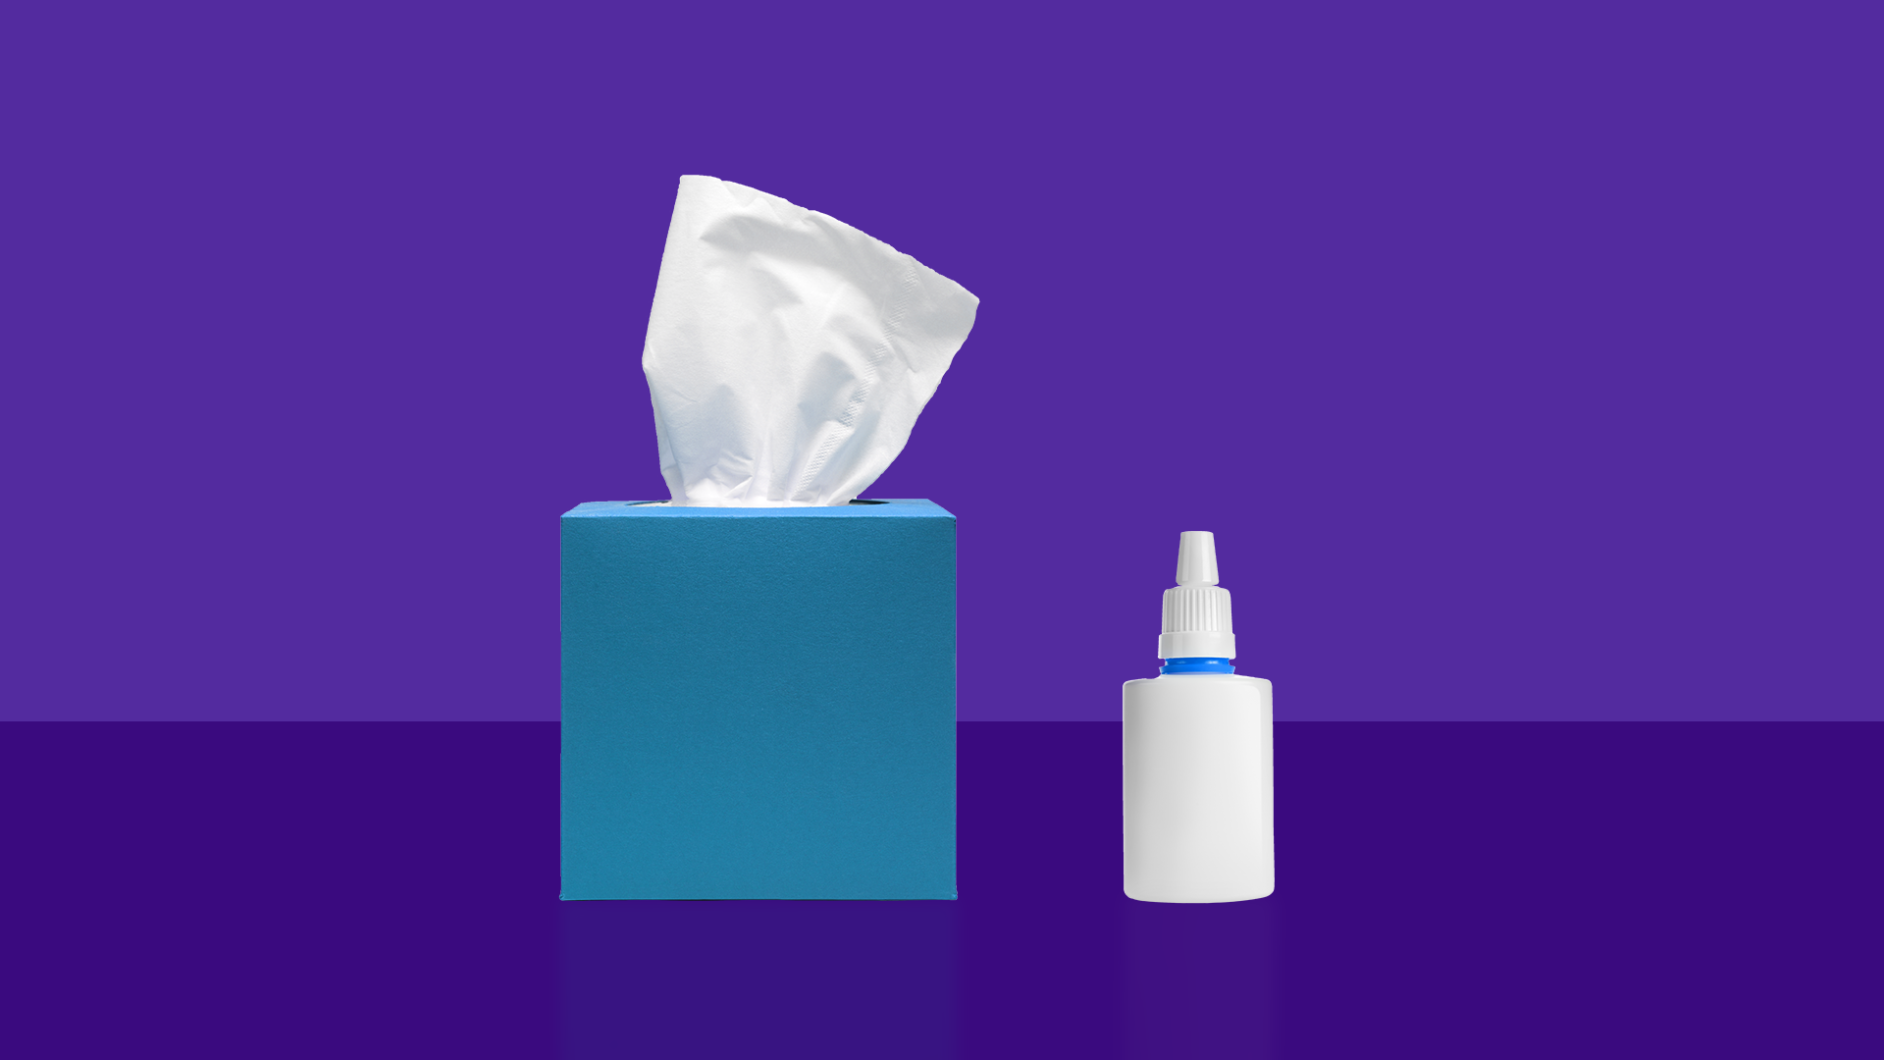 A box of tissues and nasal spray represents rebound congestion and Afrin addiction